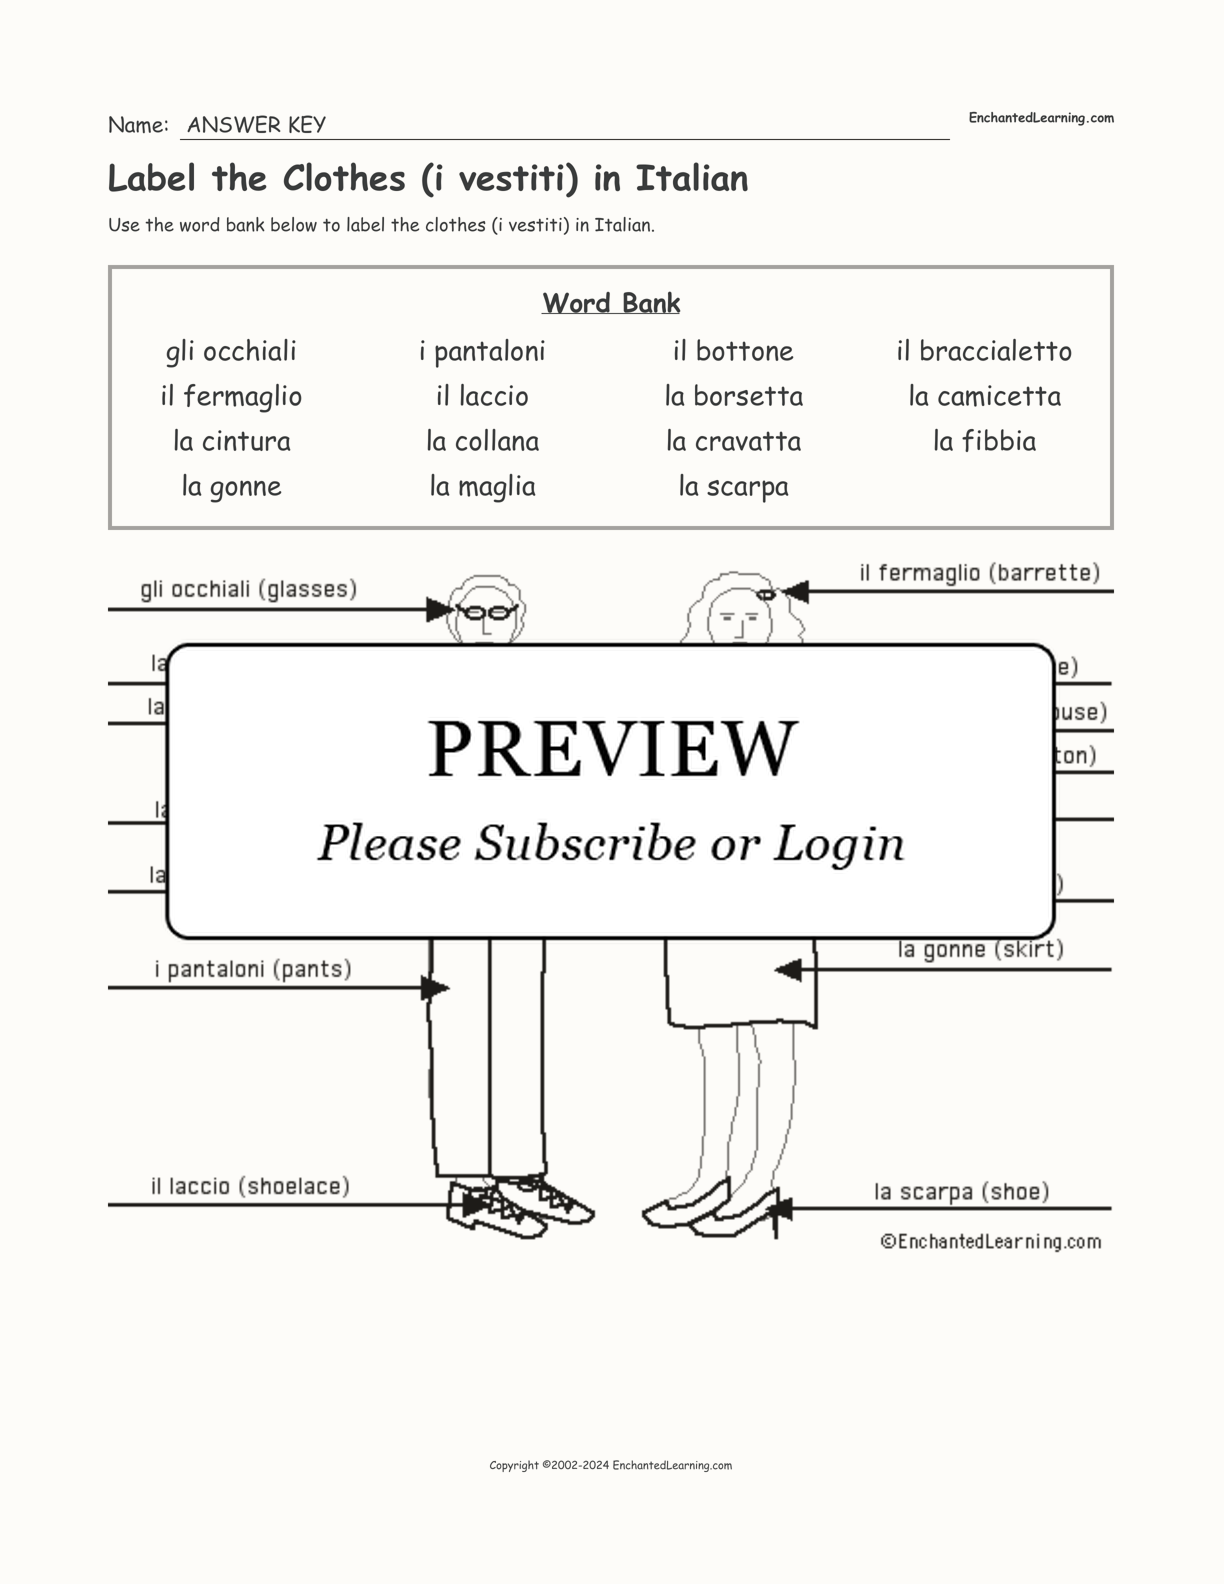 Label the Clothes (i vestiti) in Italian interactive worksheet page 2